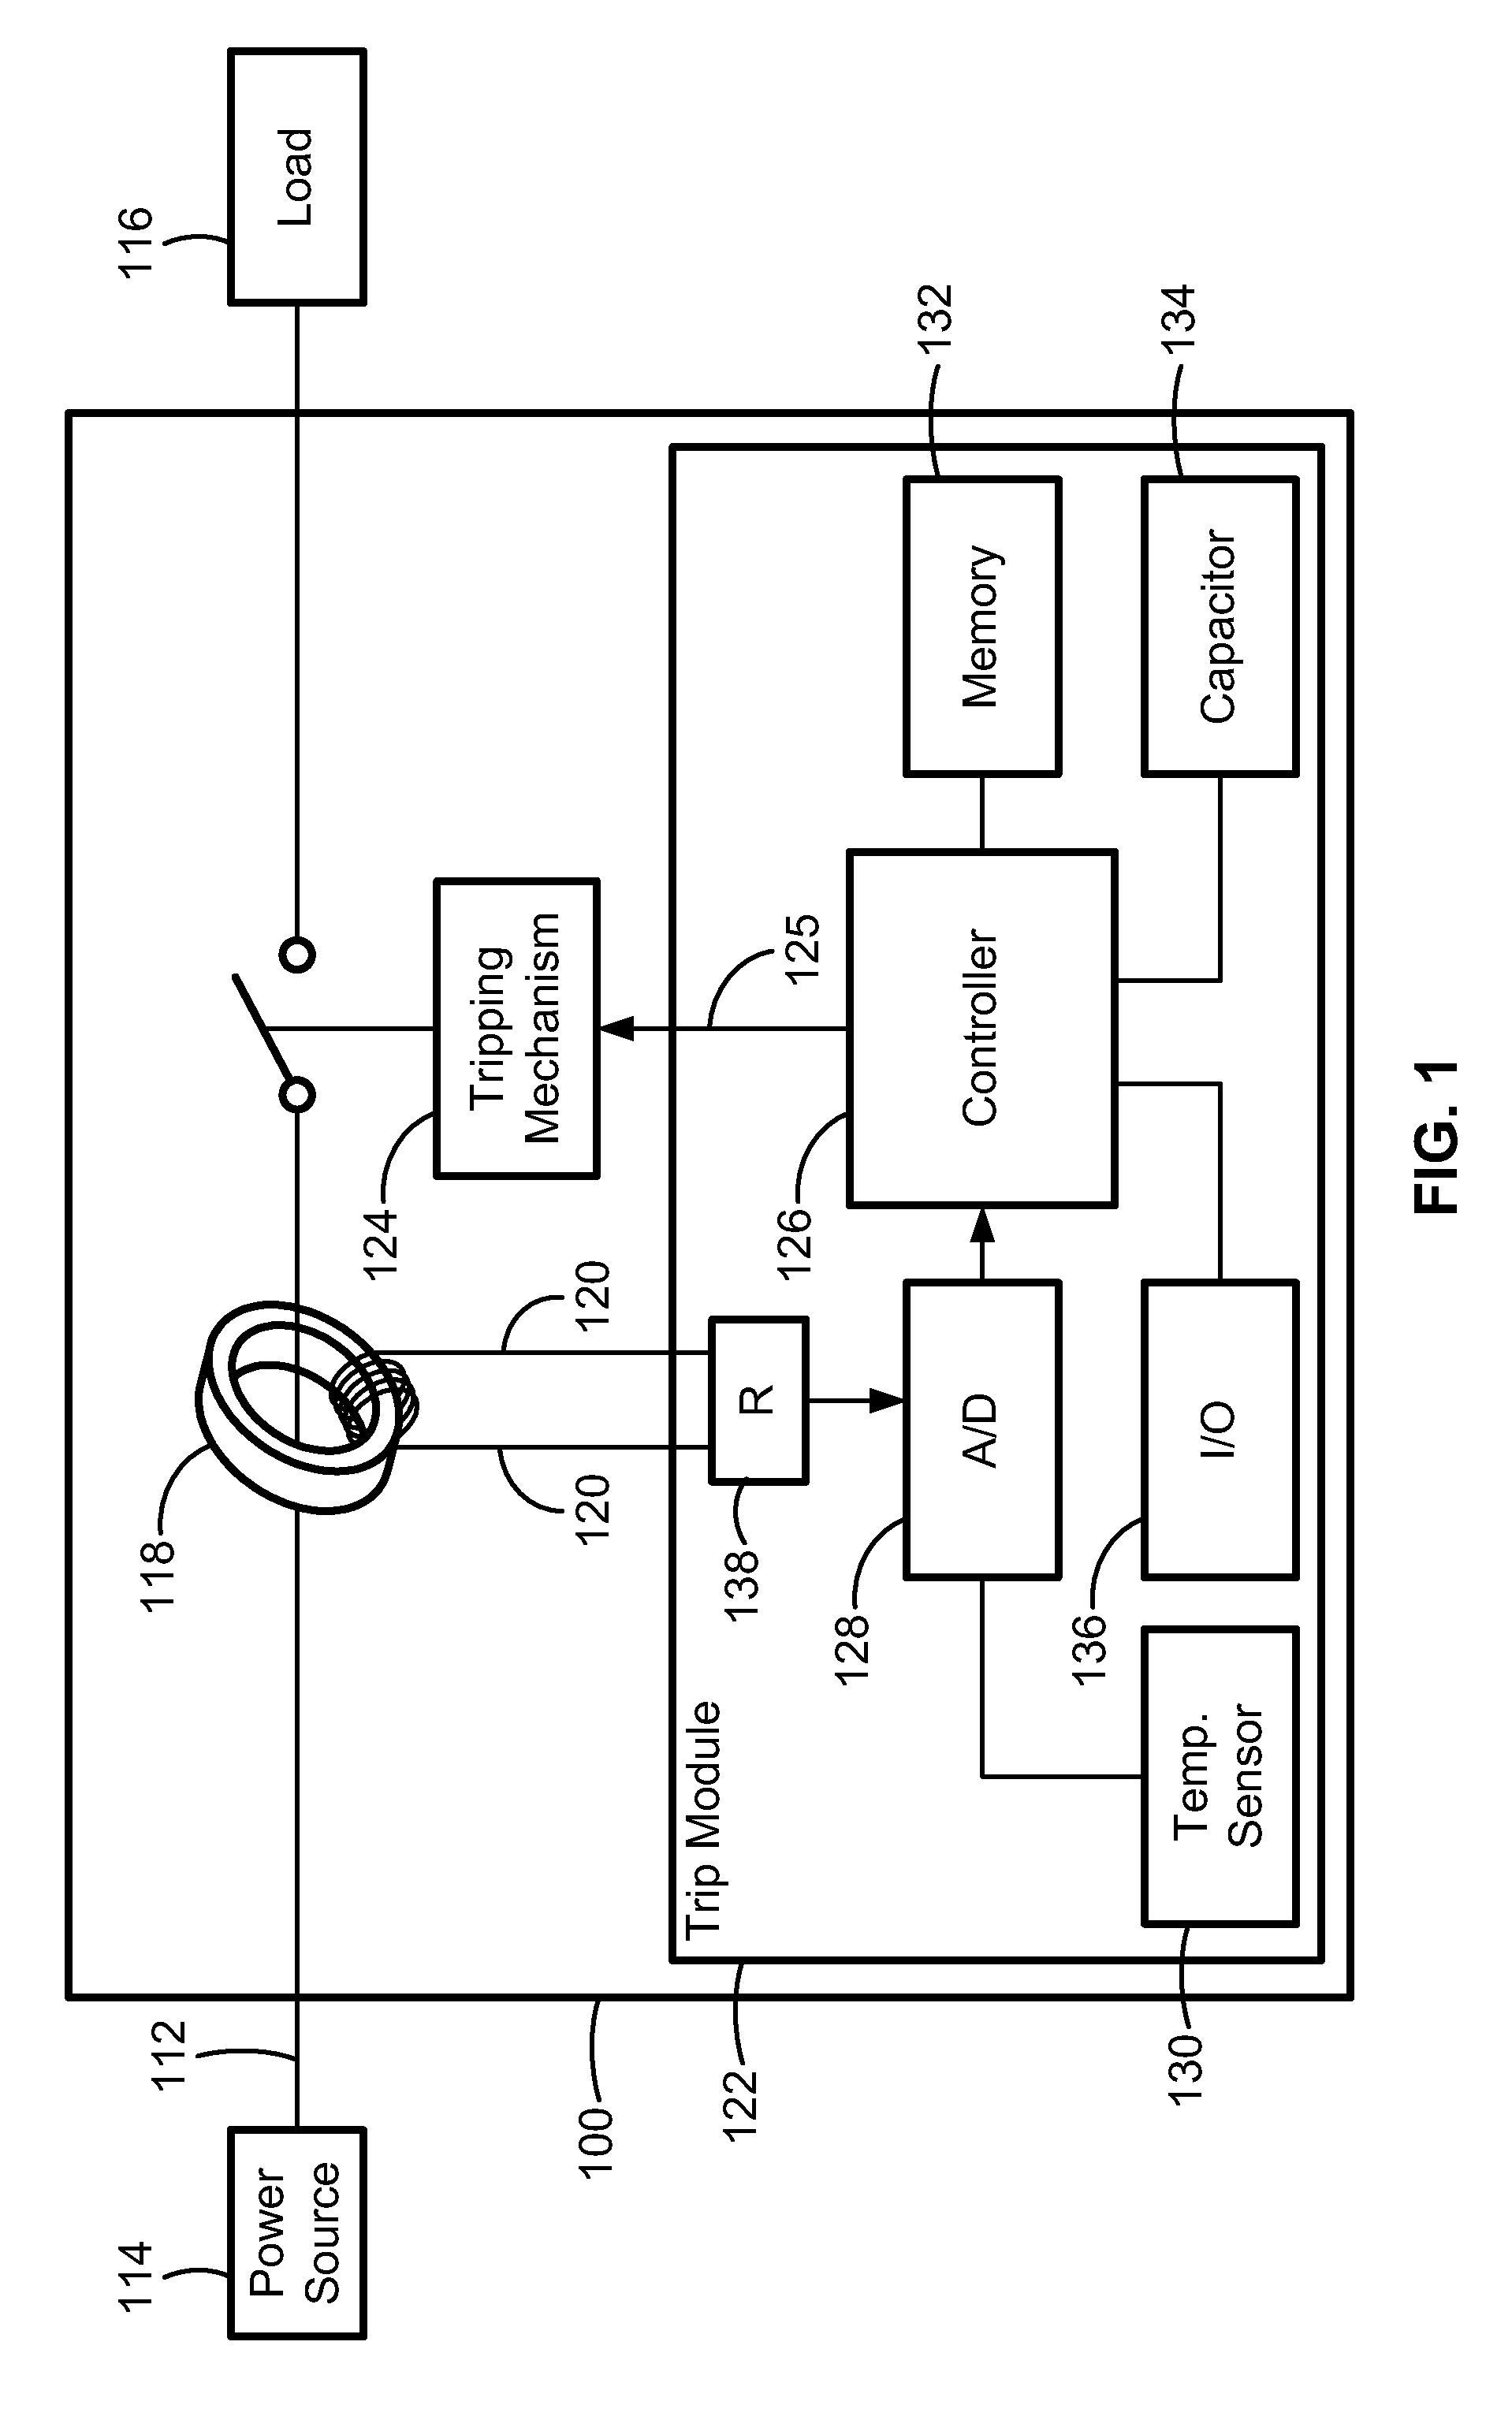 Thermal Memory In A Fault Powered System